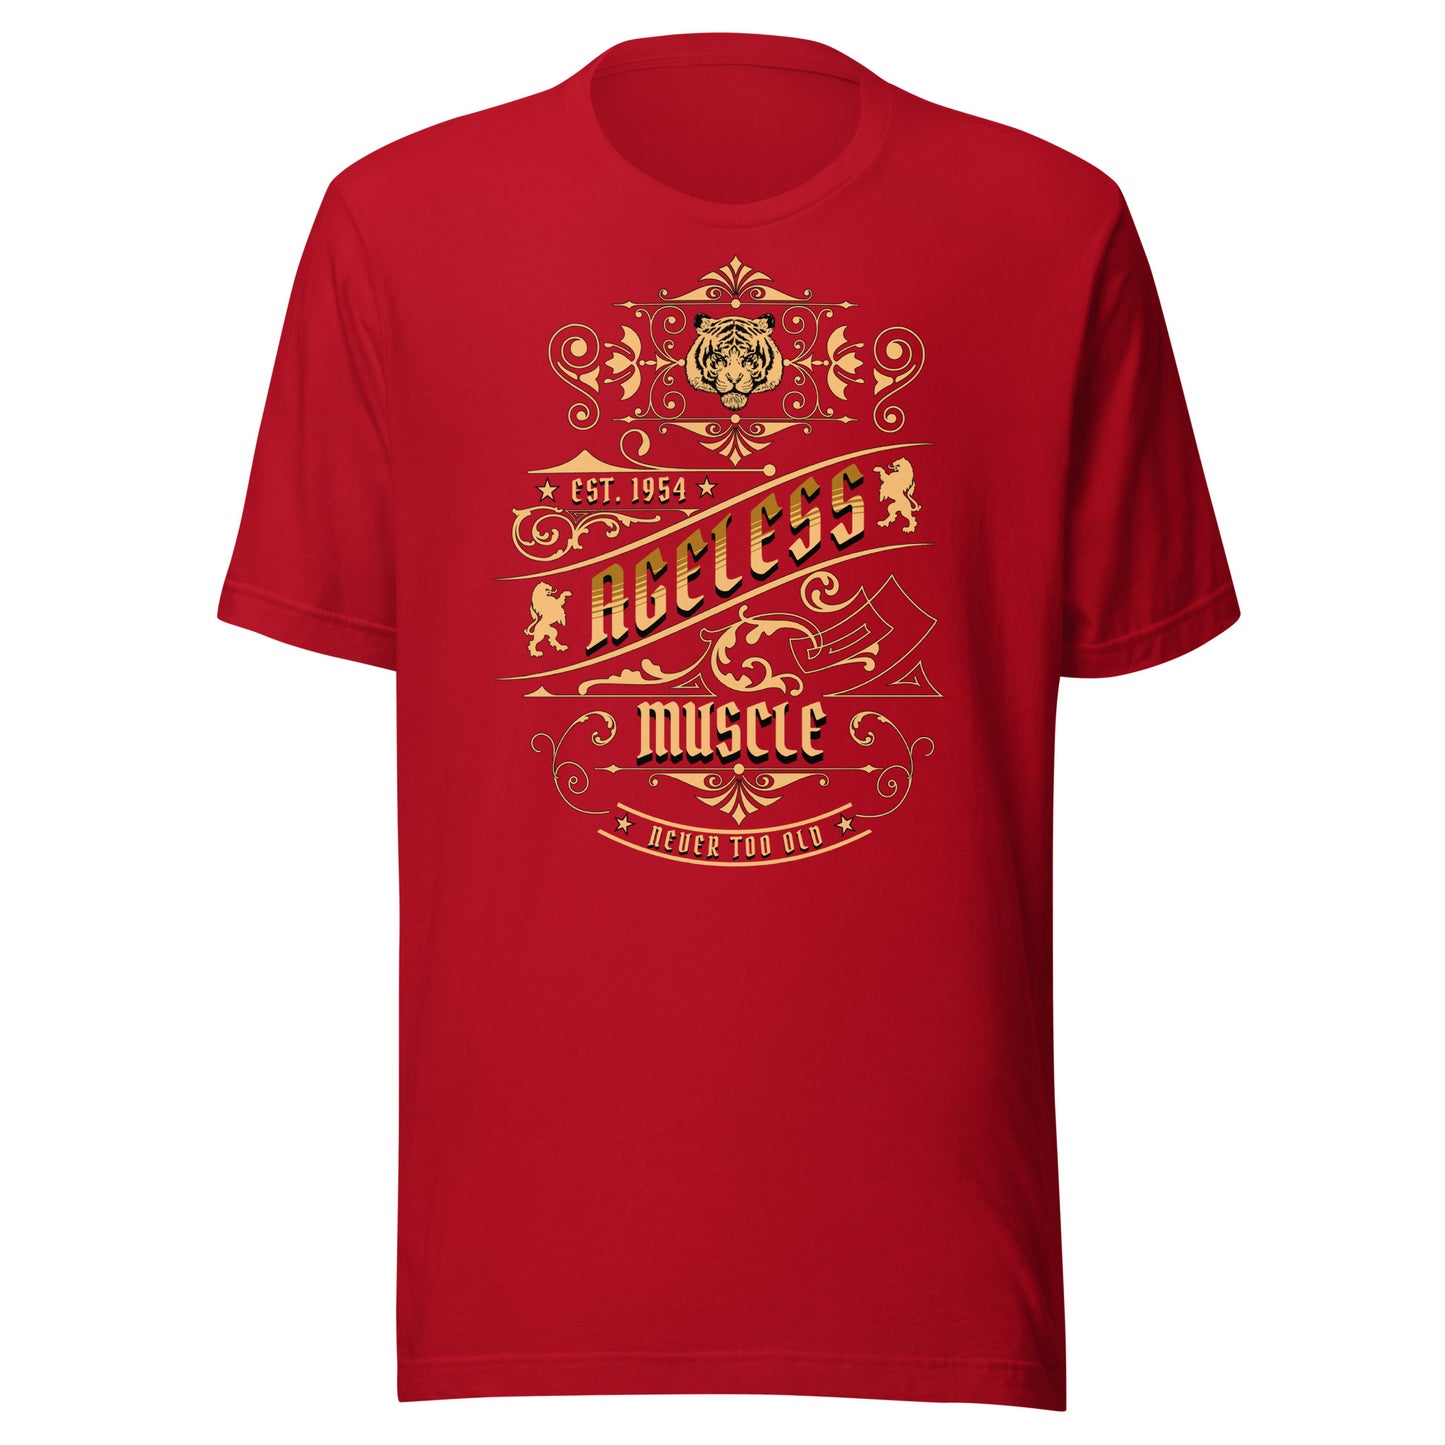 Ageless Muscle: Never Too Old Unisex t-shirt